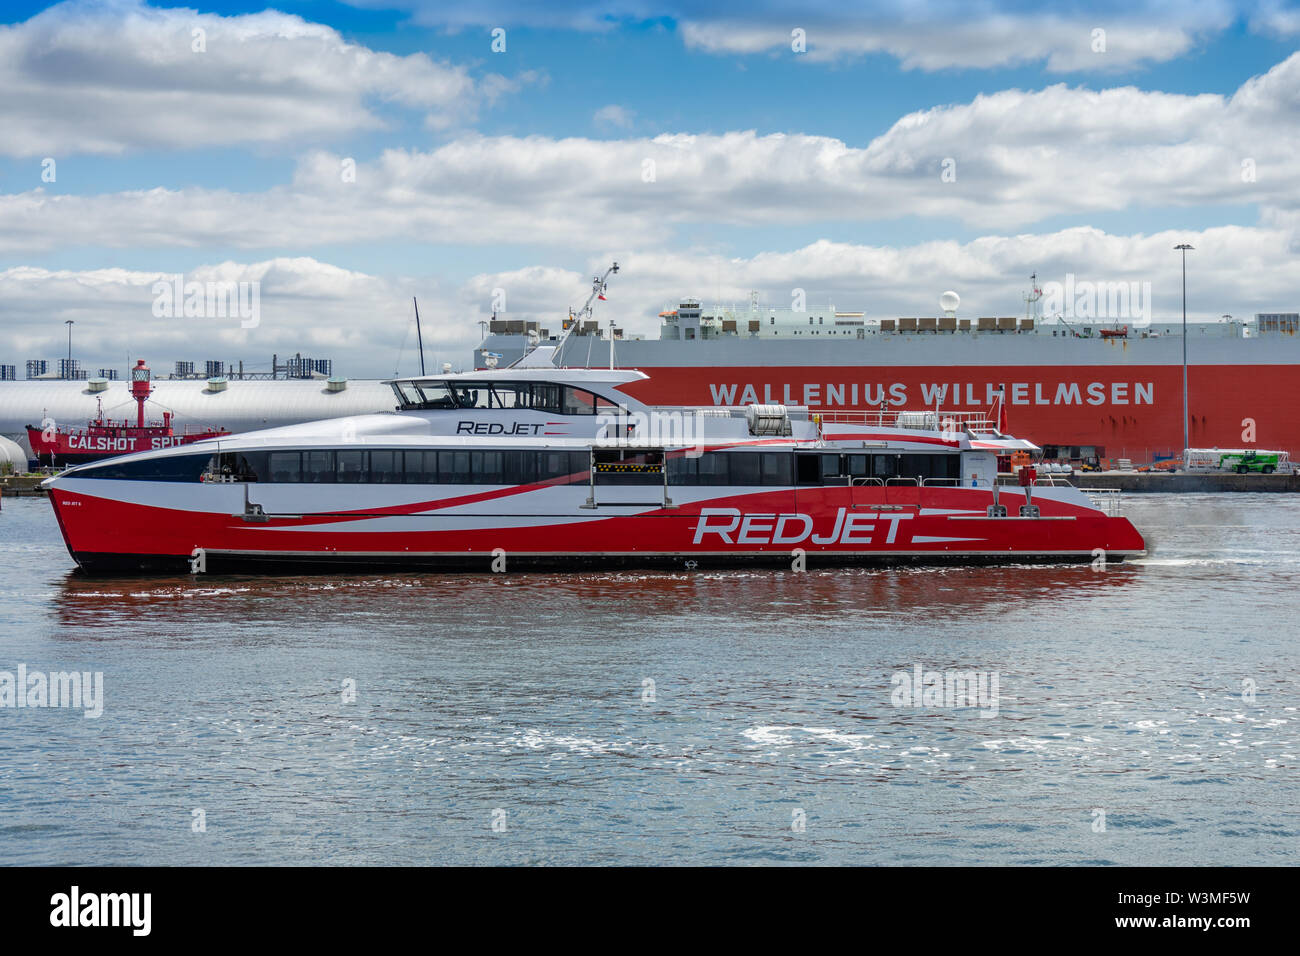 High-speed foot passenger catamaran Red Jet 6 owned by the Red Funnel ferry company arriving at Town Quay in the port of Southampton, England, UK Stock Photo